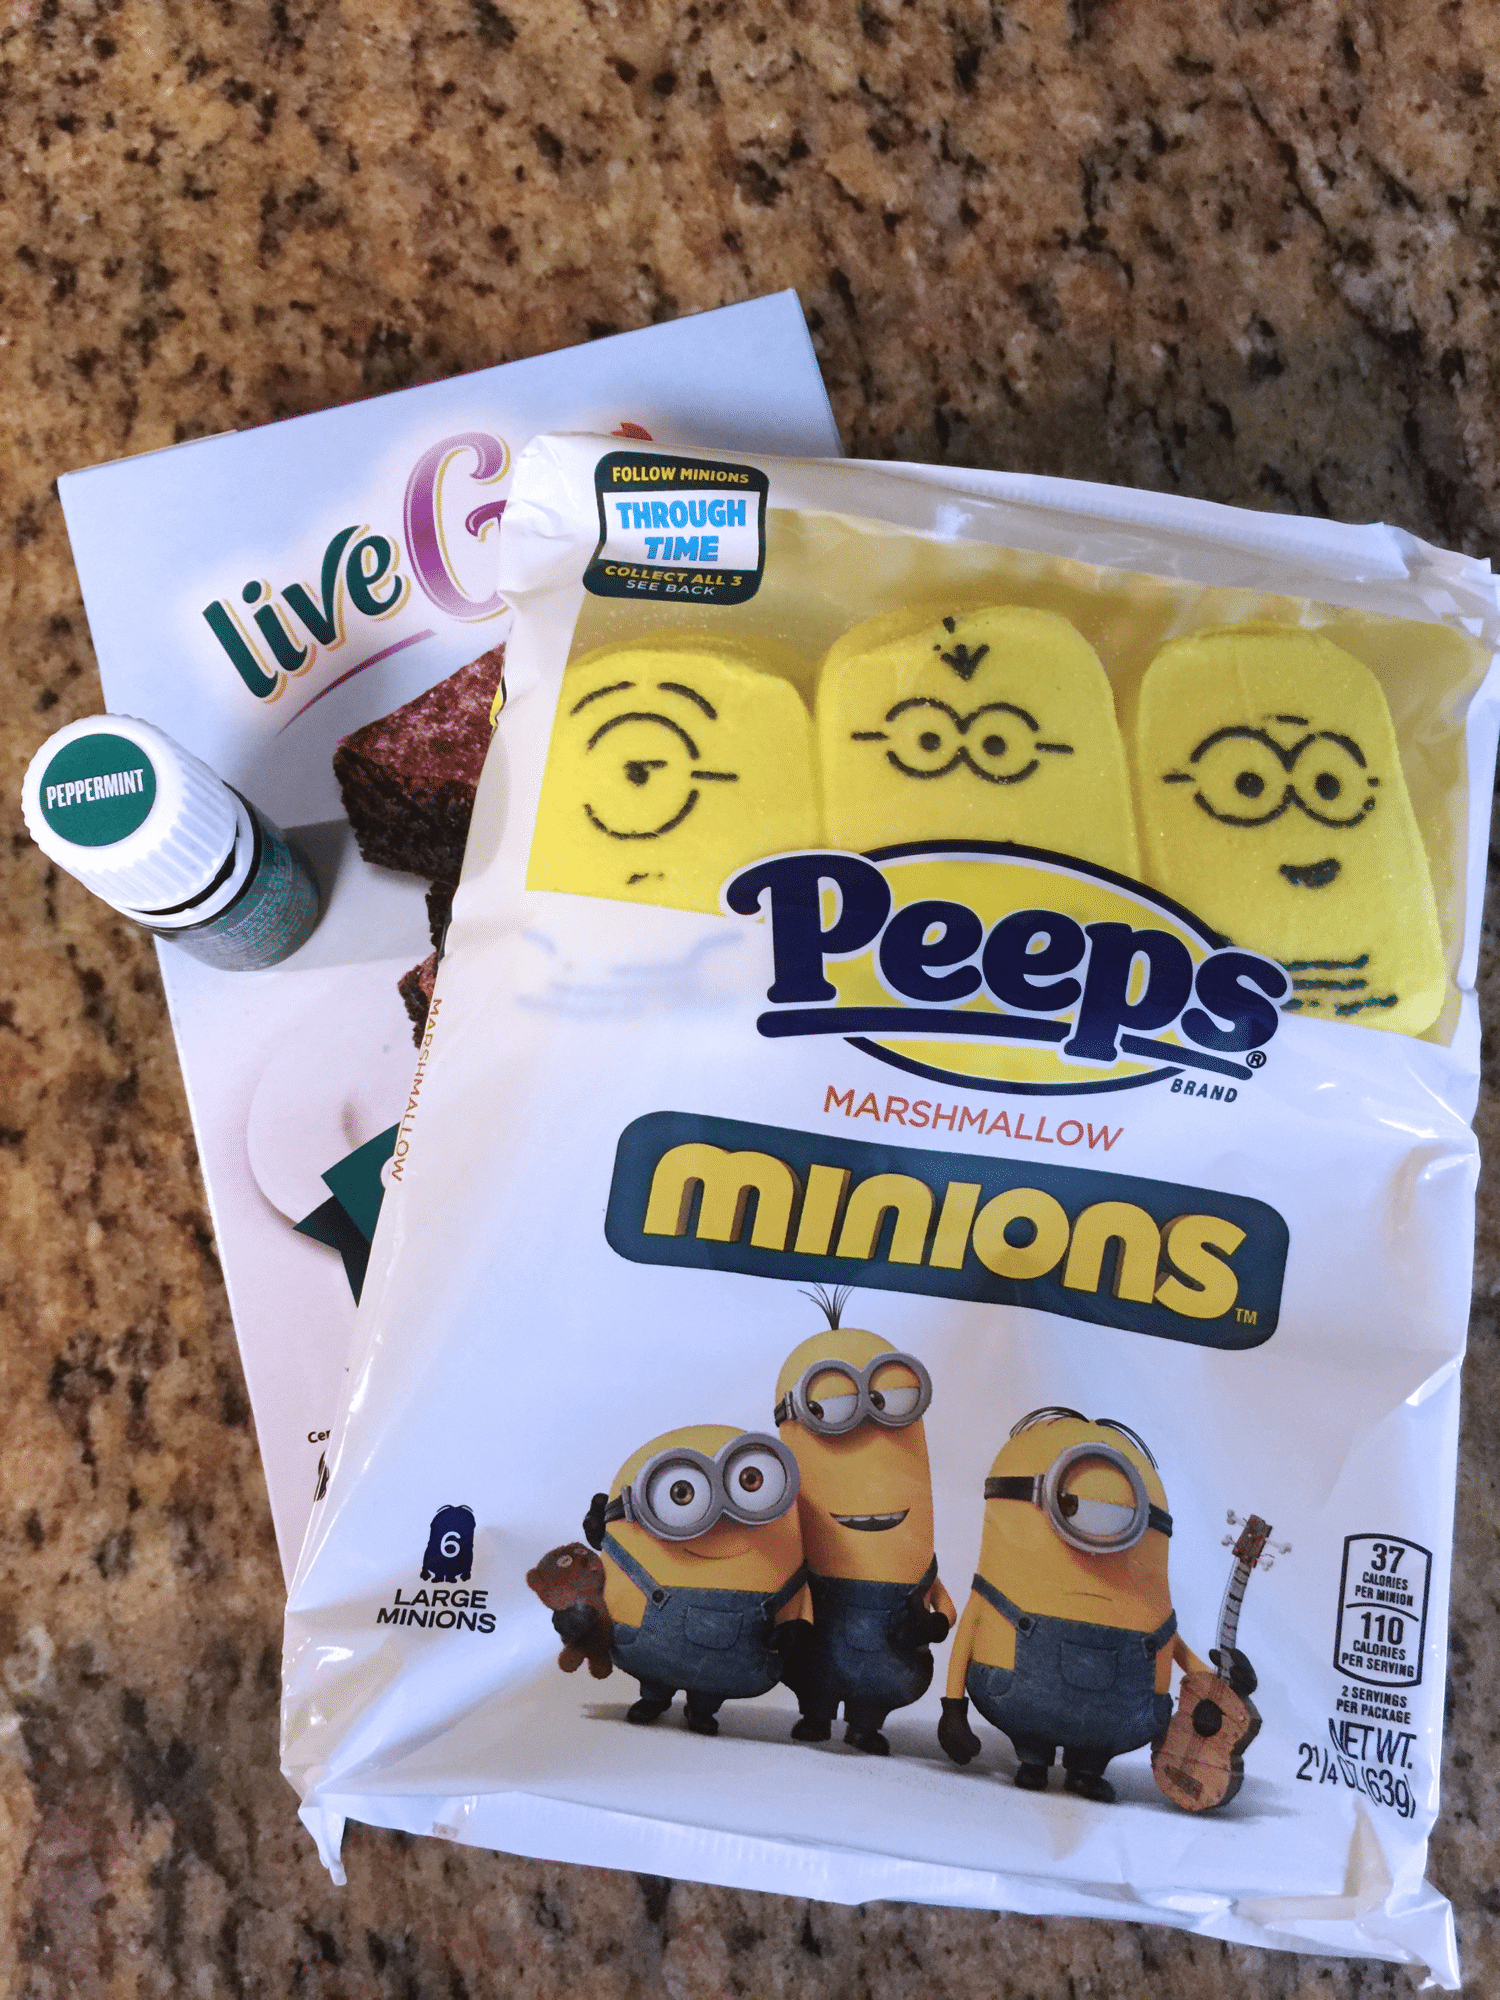 peppermint marshmallow brownies | Minions PEEPs Minions DVD giveaway